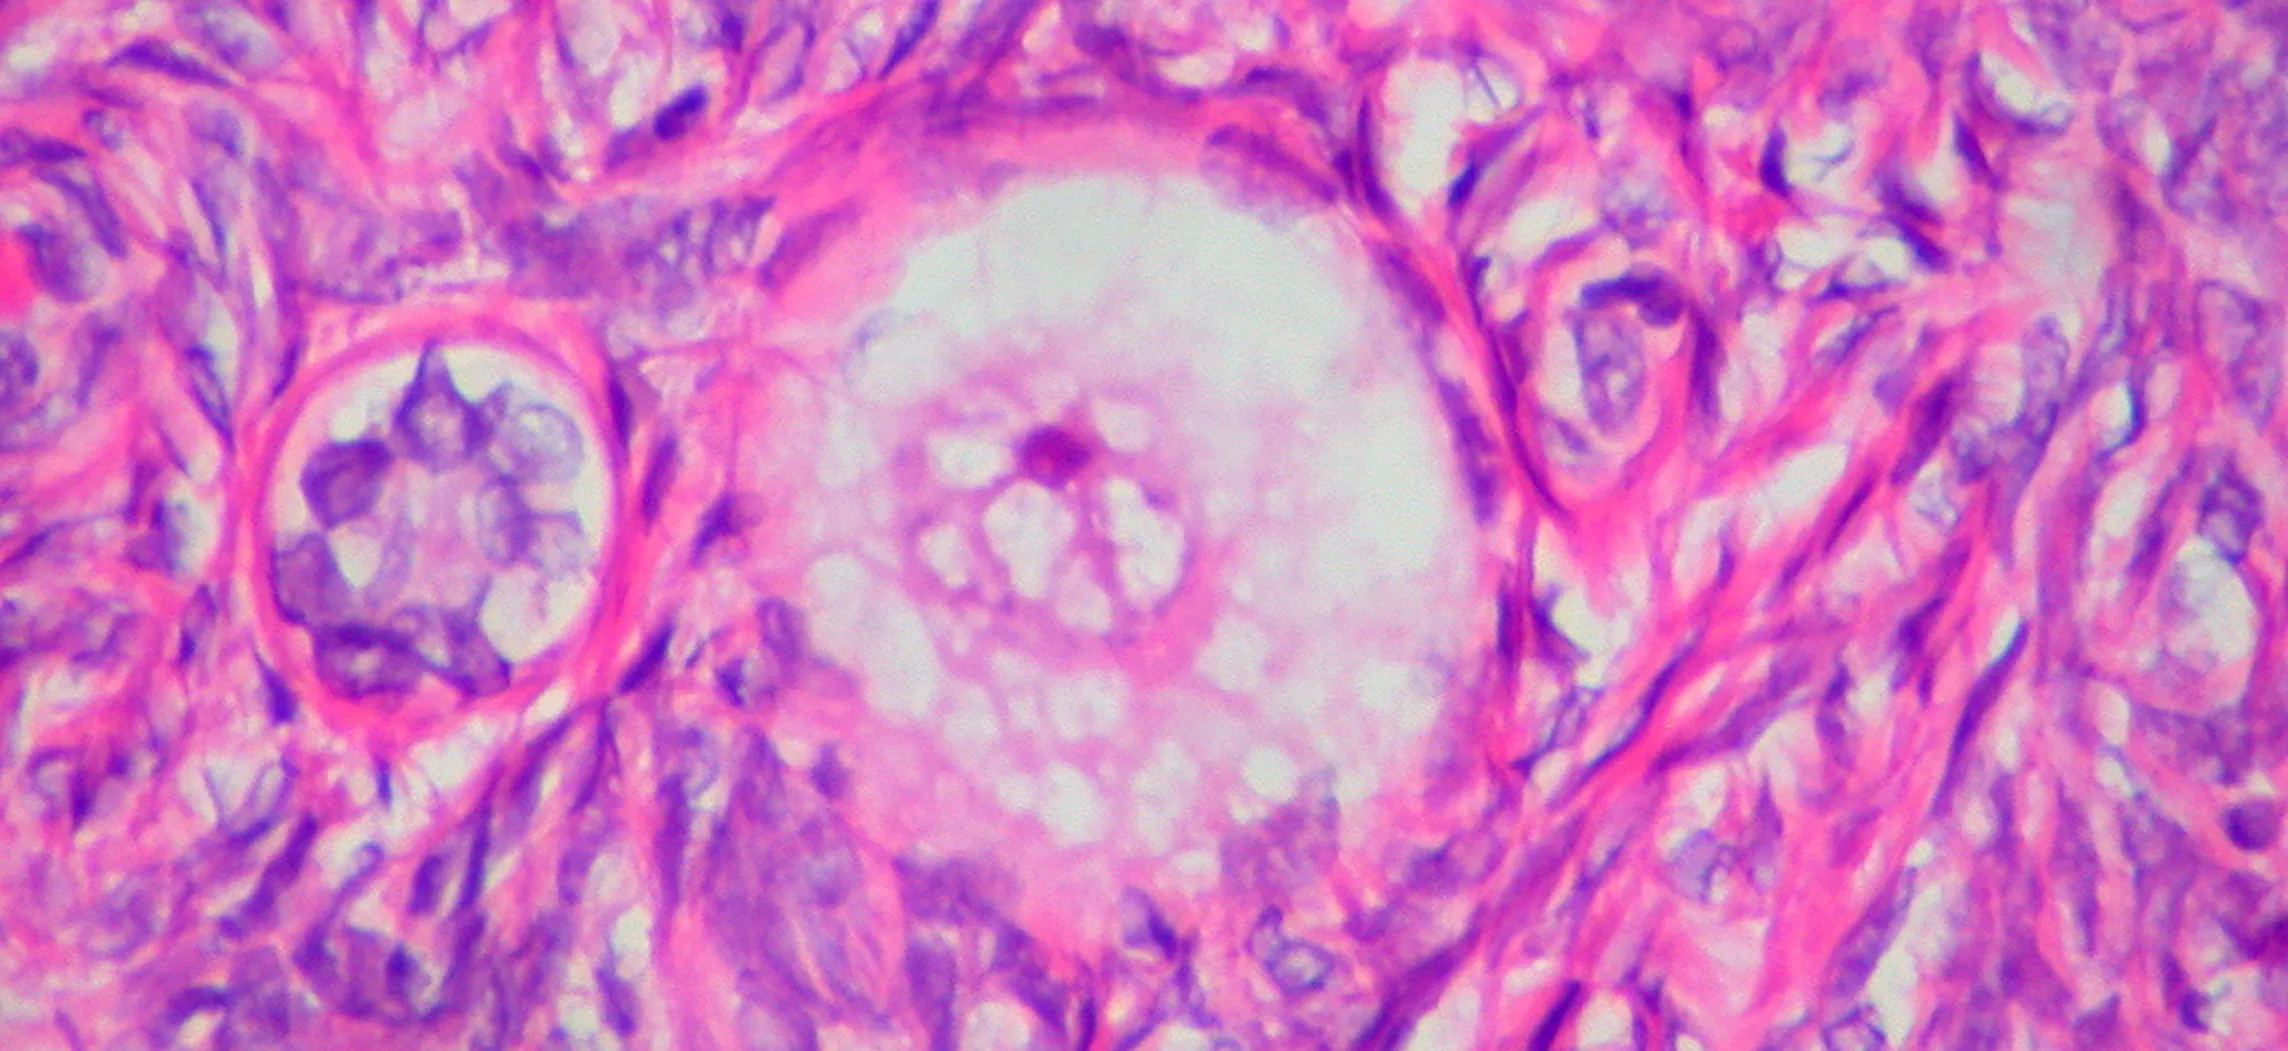 This photo shows an oocyte.